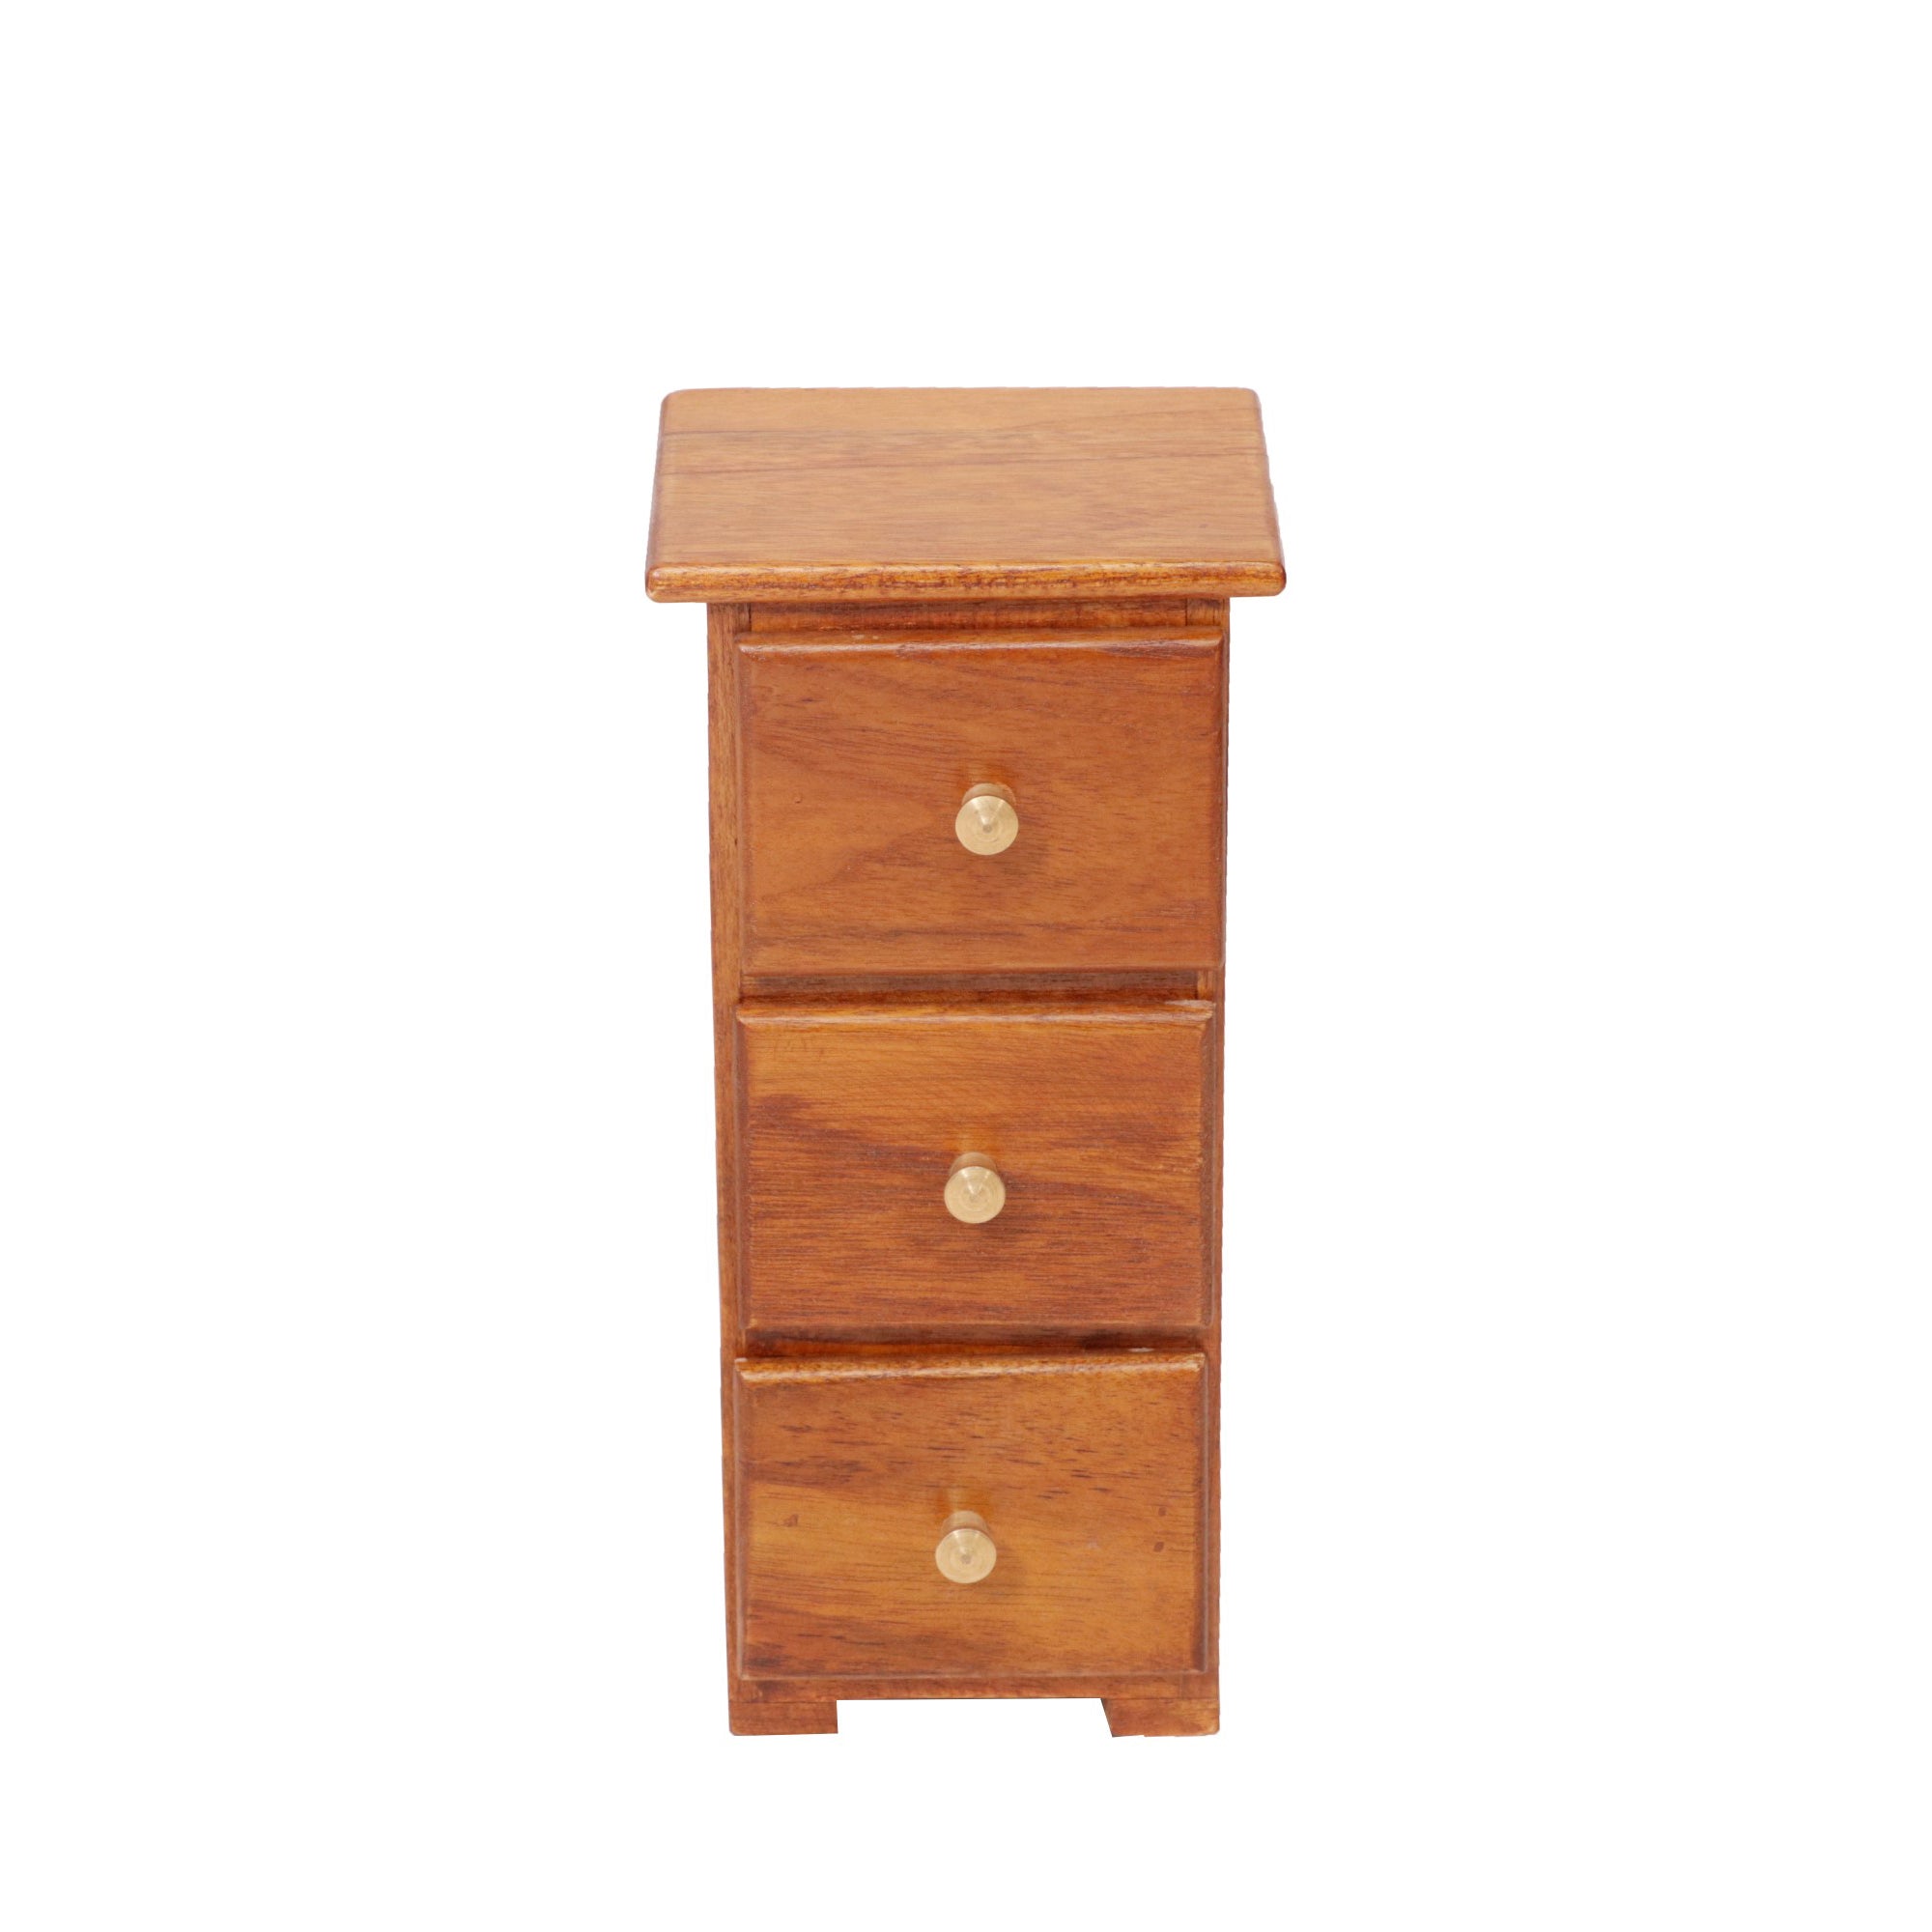 Wooden Miniature Outer Space 3 Drawer Chest Tower (The product is used as Desk organiser) (Natural Touch) Desk Organizer